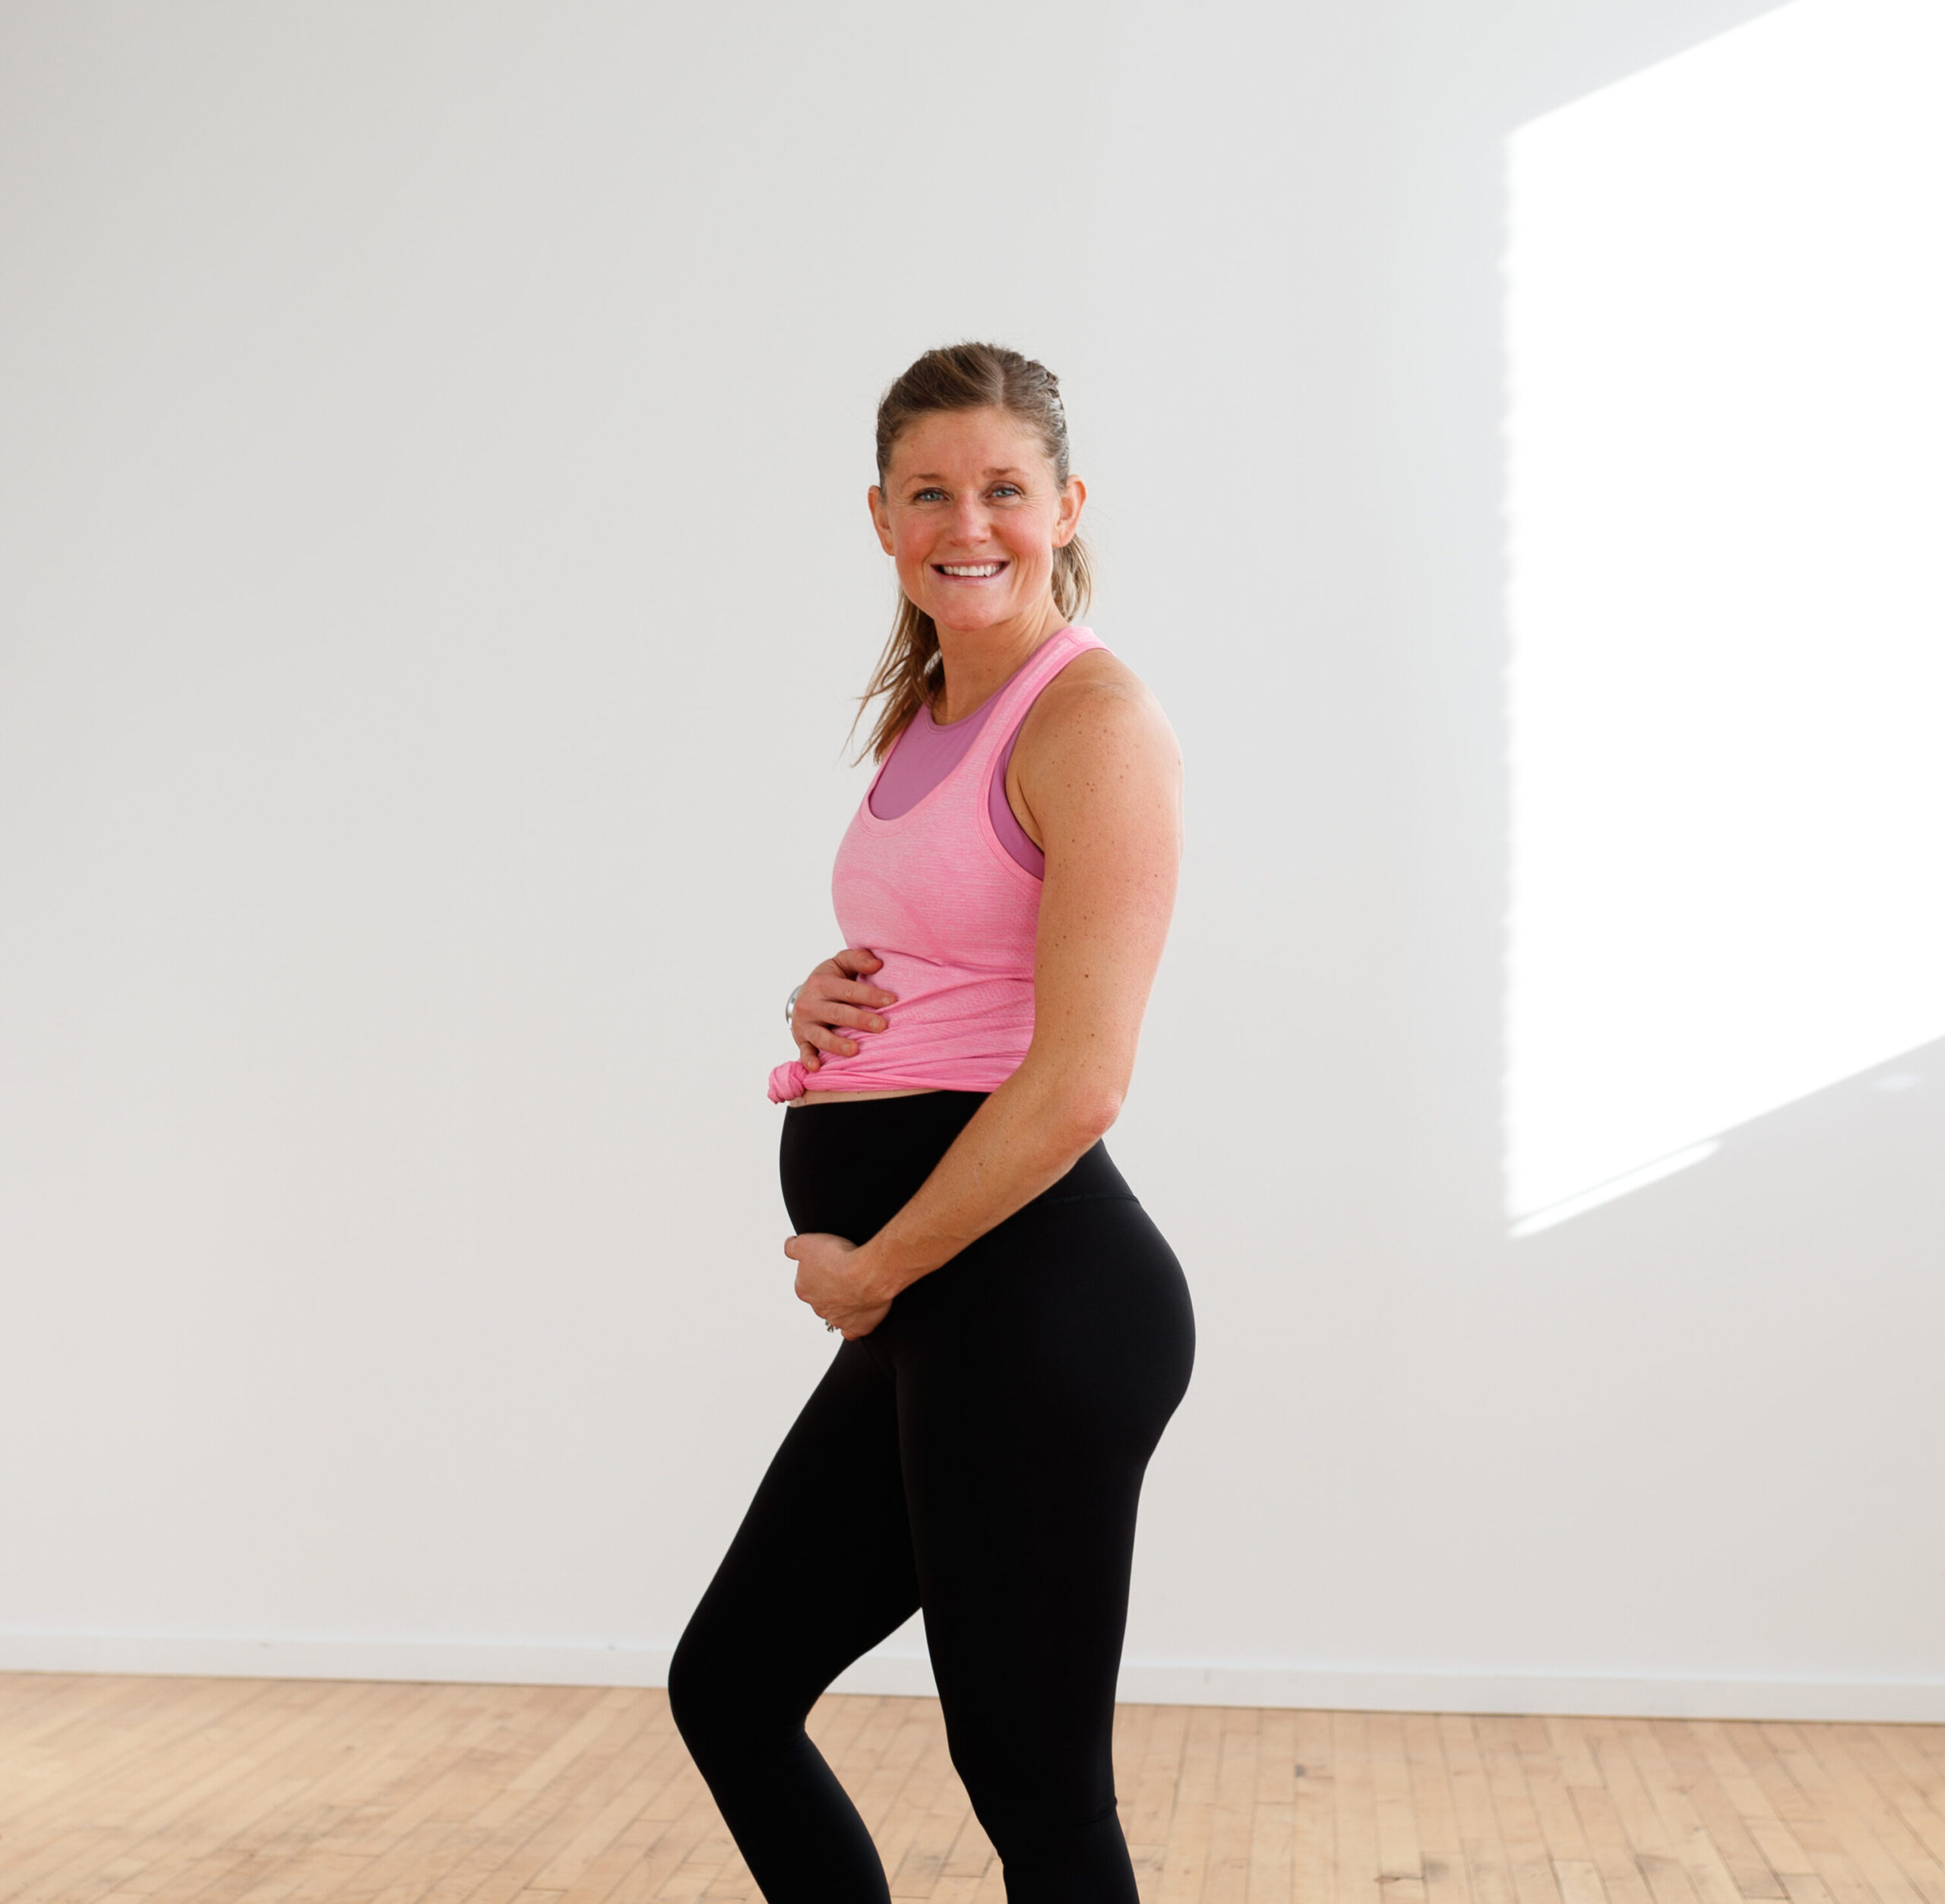 5 Arm exercises that are safe for pregnancy